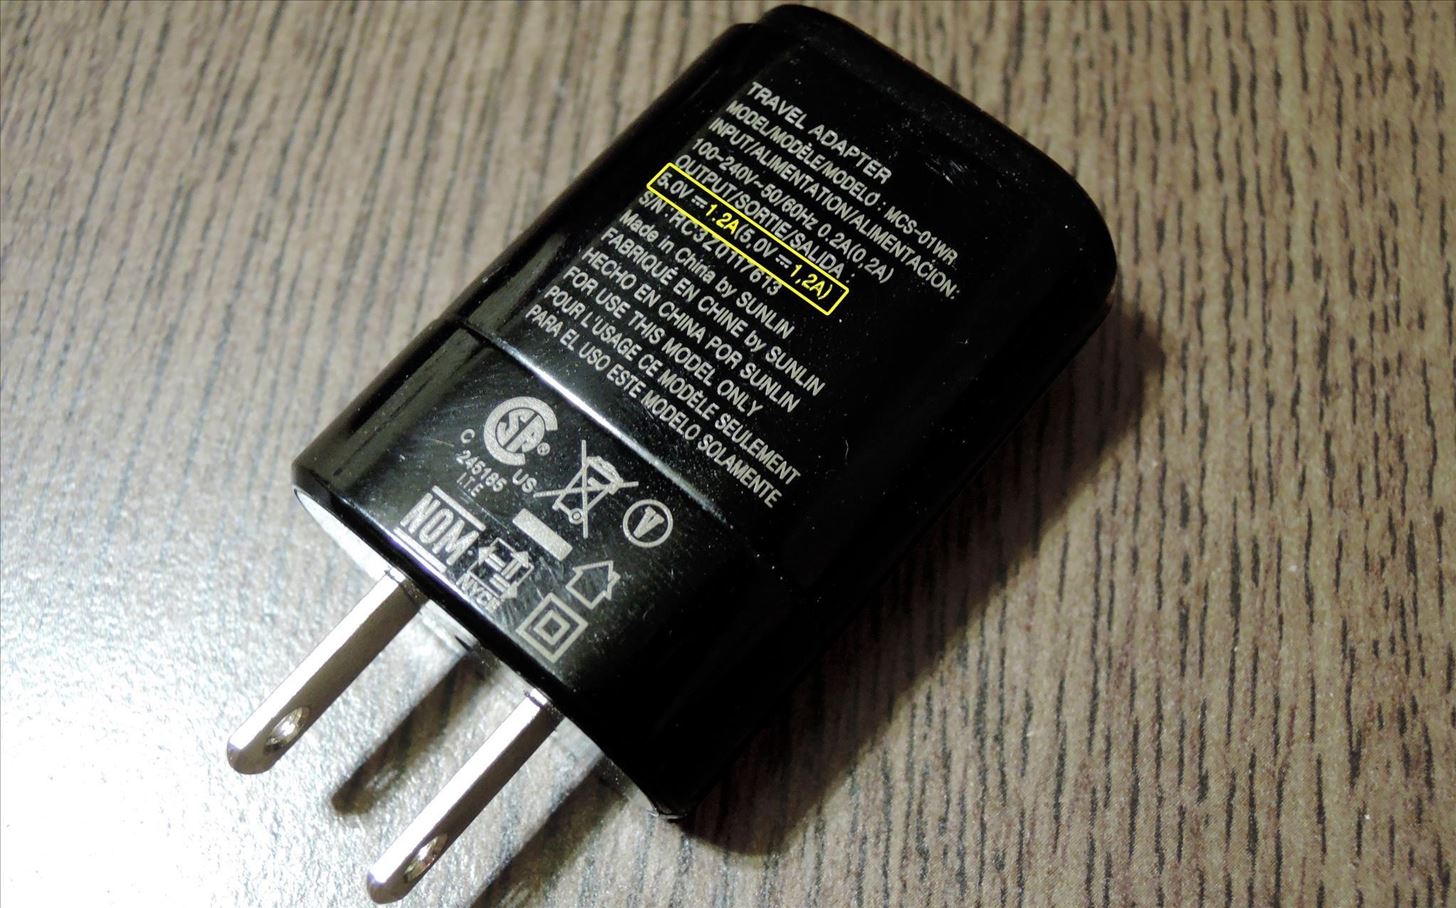 Are Your Chargers Faulty or Slow? Here